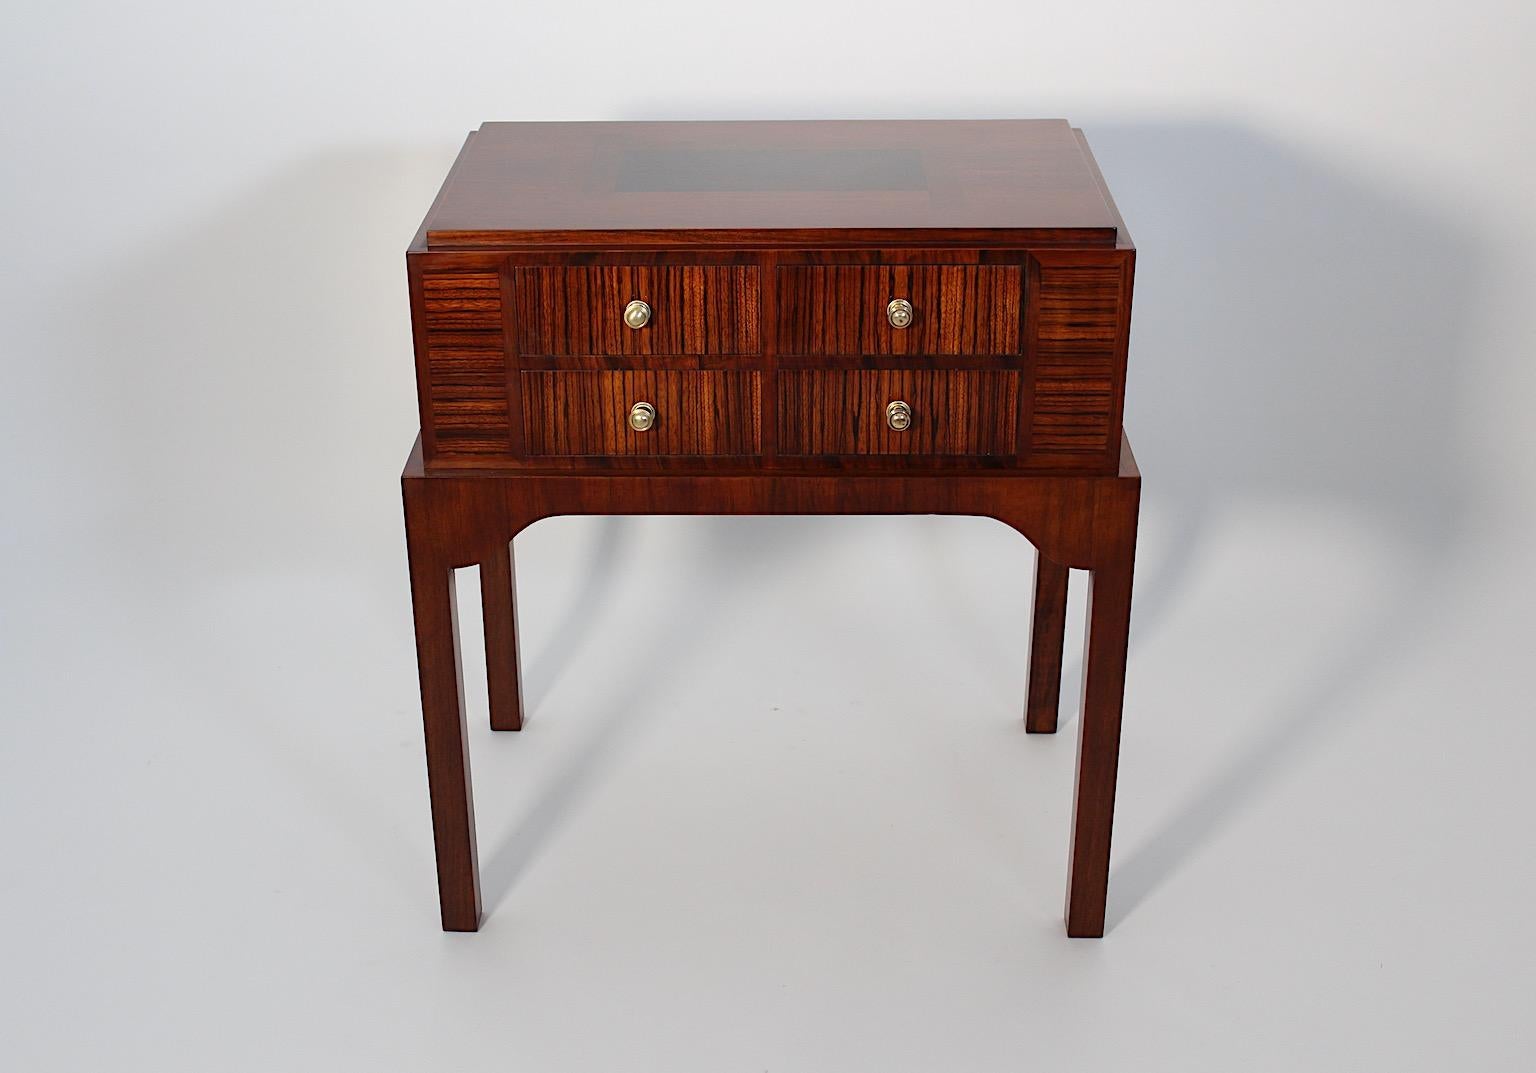 Art Deco vintage freestanding chest or commode with 4 ( four ) drawers from various walnut veneers in geometric pattern Vienna circa 1925.
An amazing and great new arrival, this chest from the strong field of Wiener Möbel.
This charming chest gives